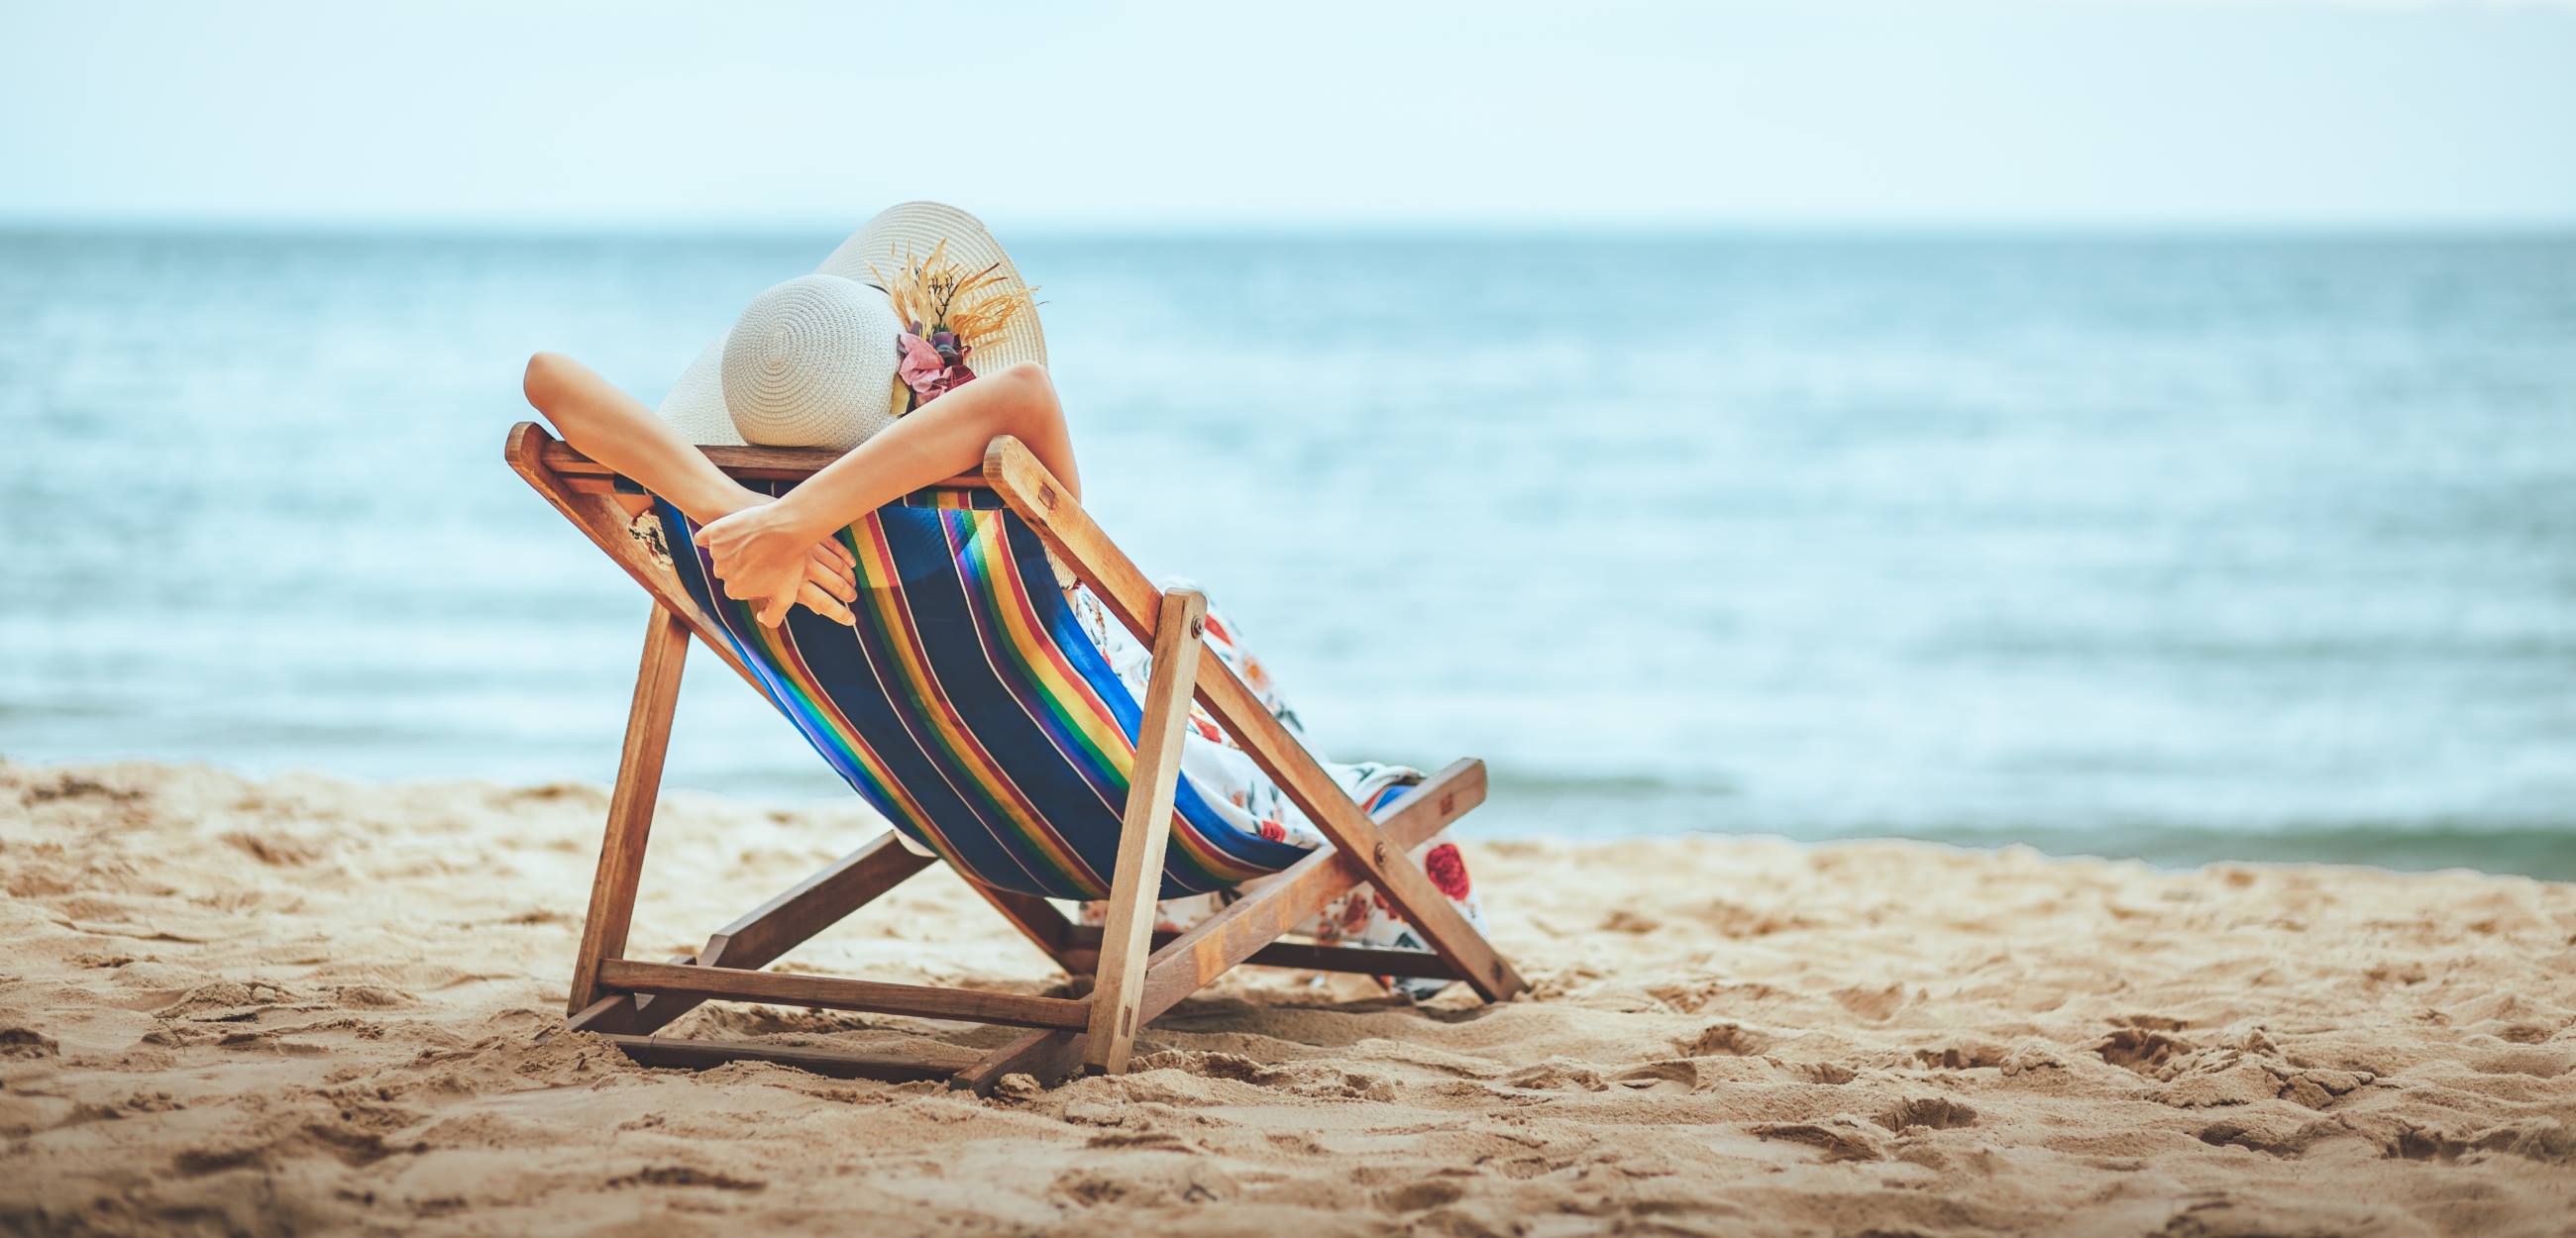 5-Safest-Places-for-Solo-Travel-lady-relaxing-on-a-chair-on-the-beach